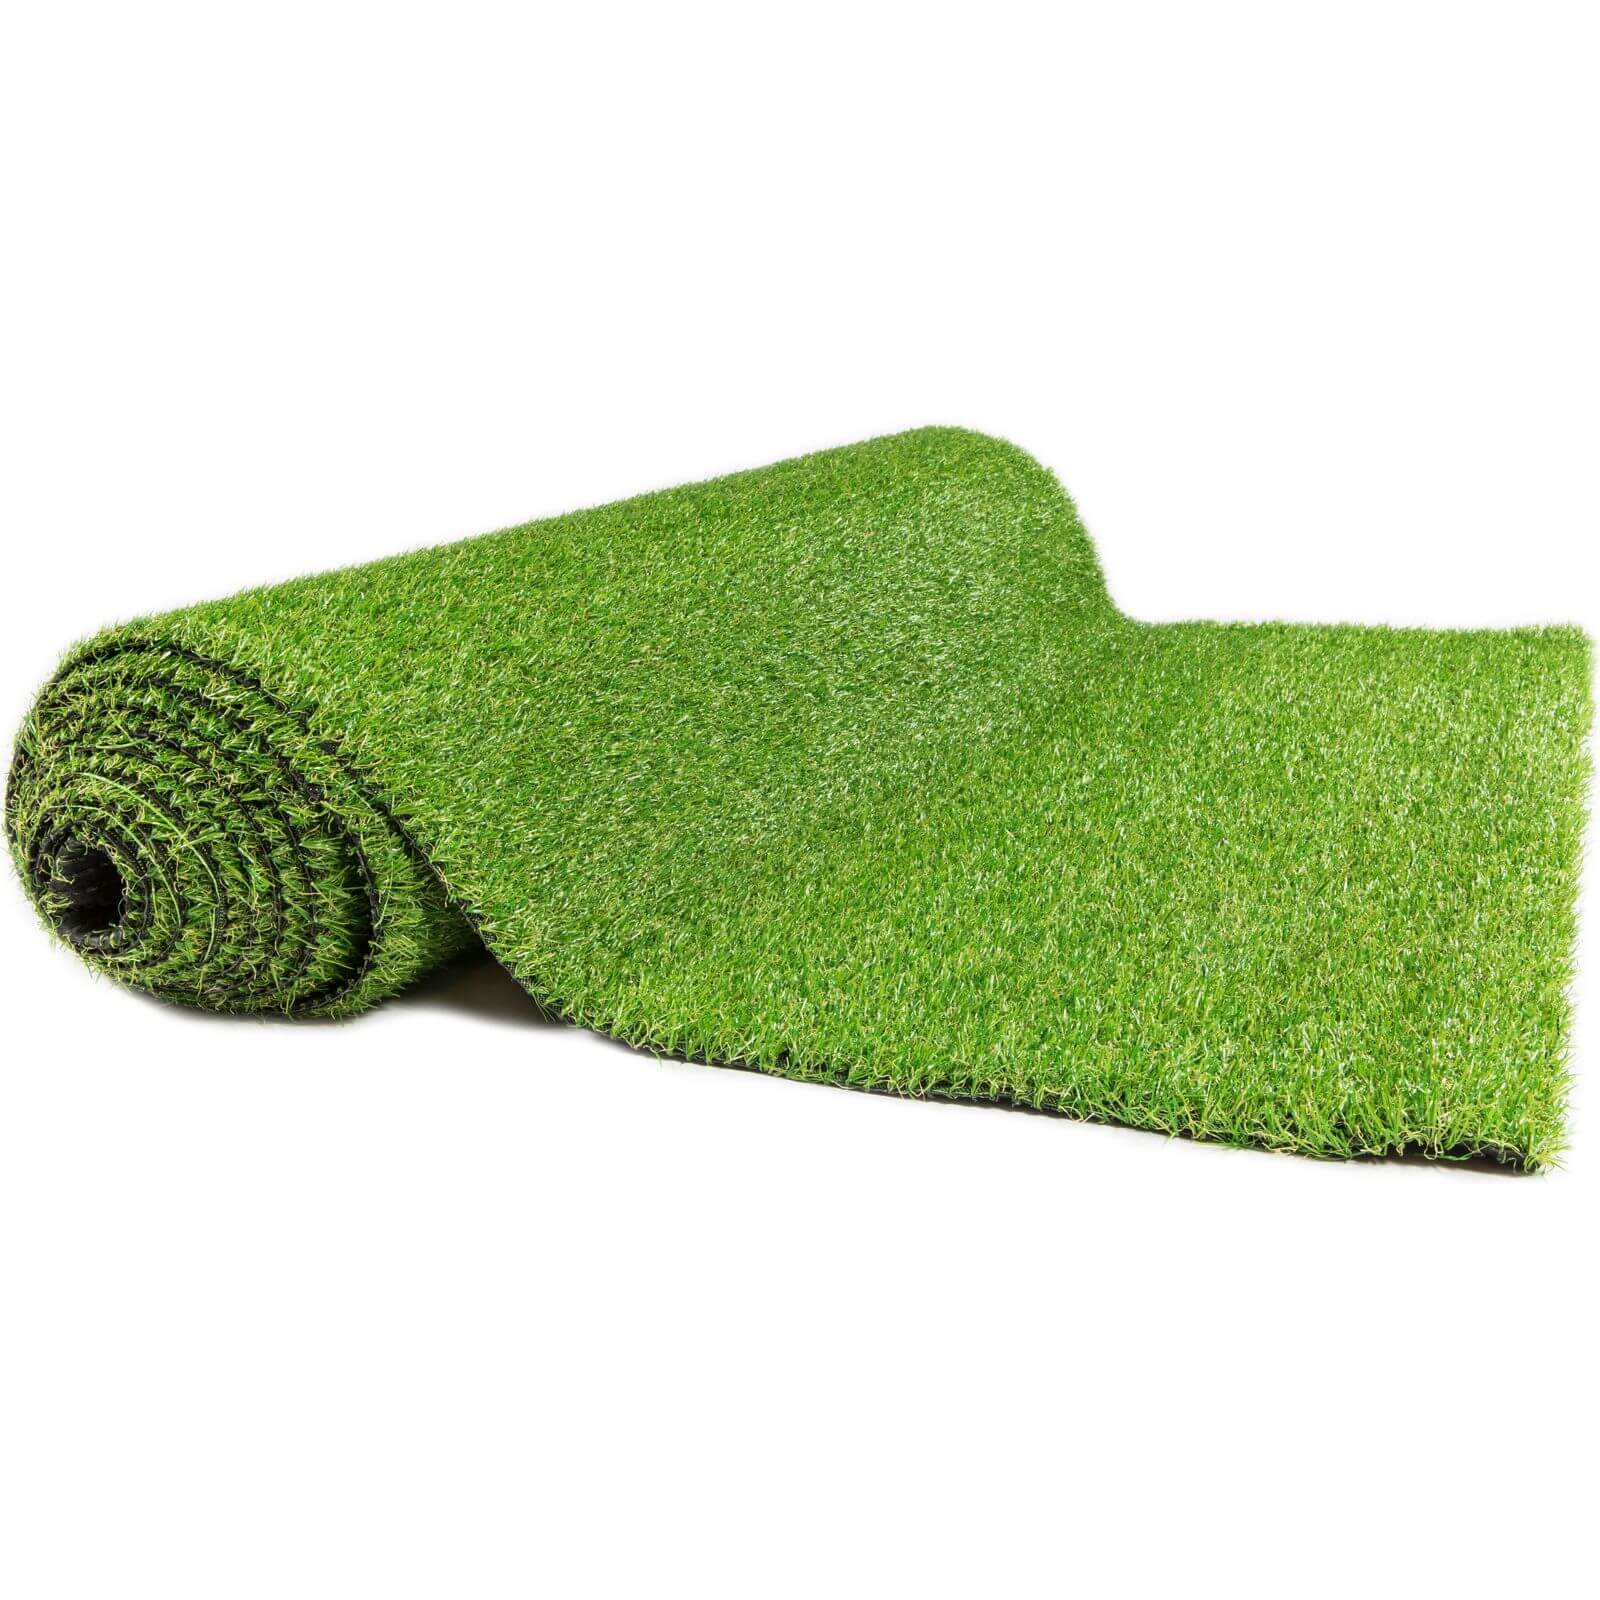 Greenstyle Economy Artificial Grass 3m X 1m Roll 15mm